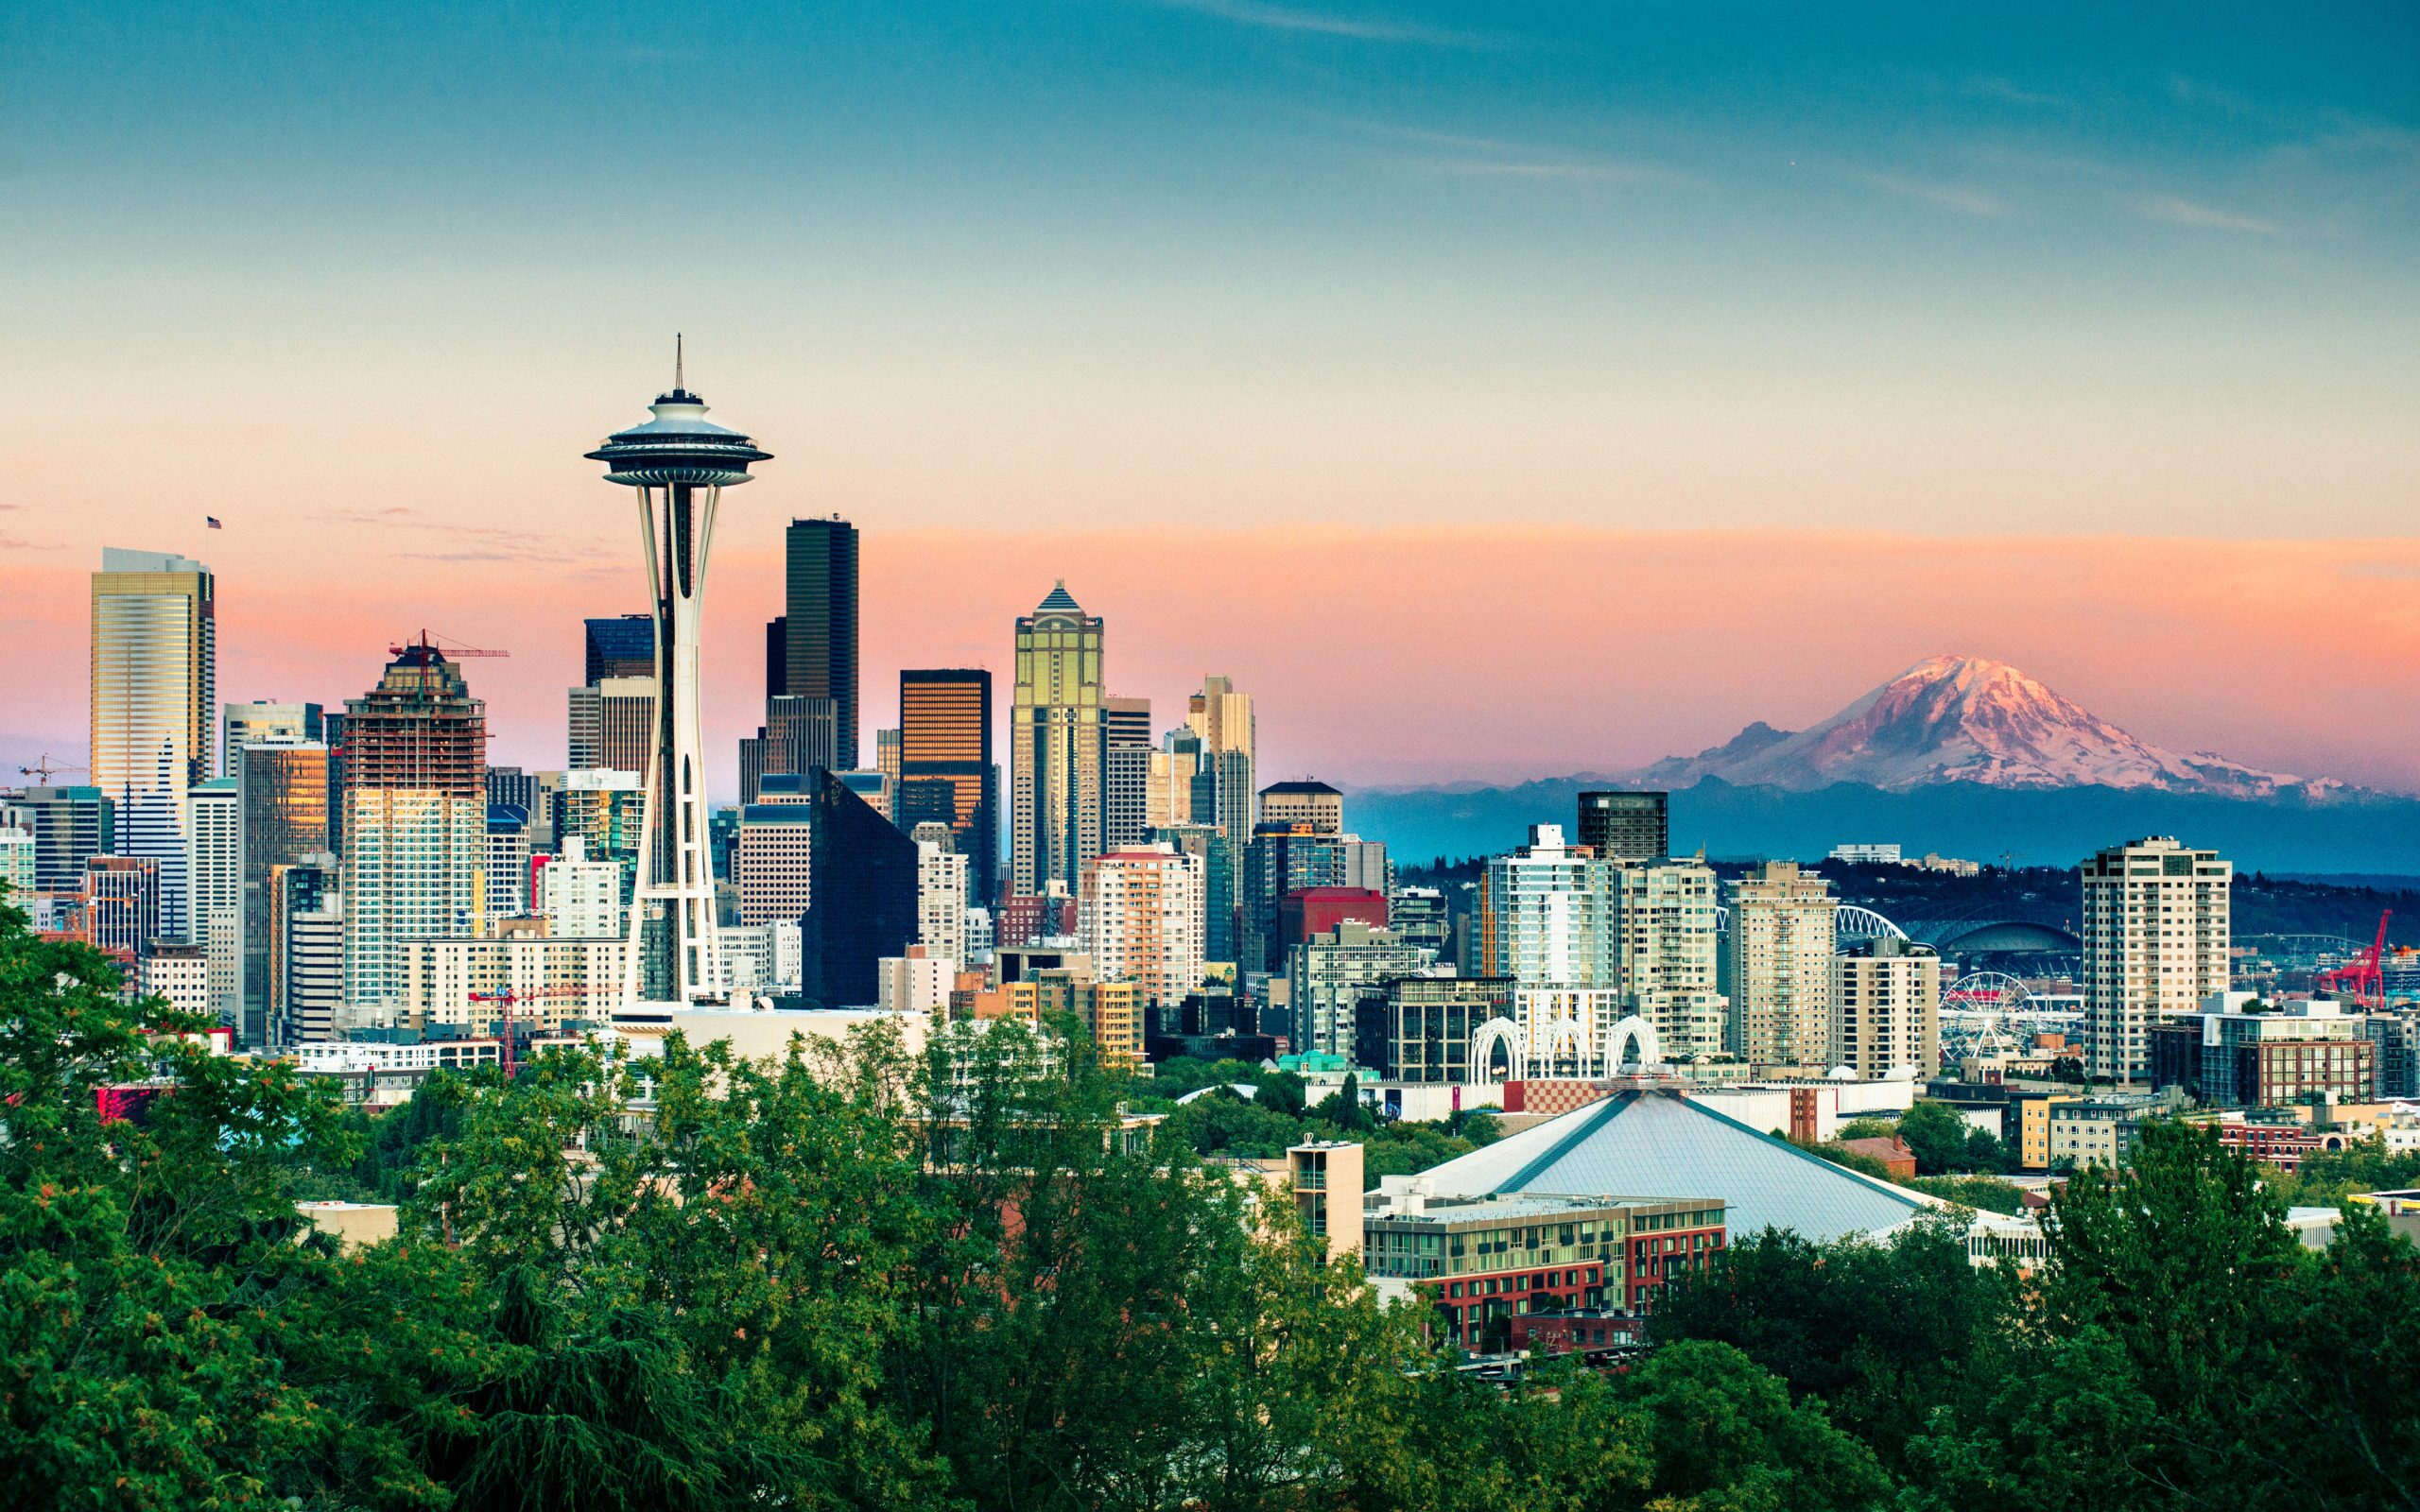 Dr-Won-Cosmetic-Surgery-Seattle-Skyline-and-Mount-Rainier-at-Sunset-scaled.jpg